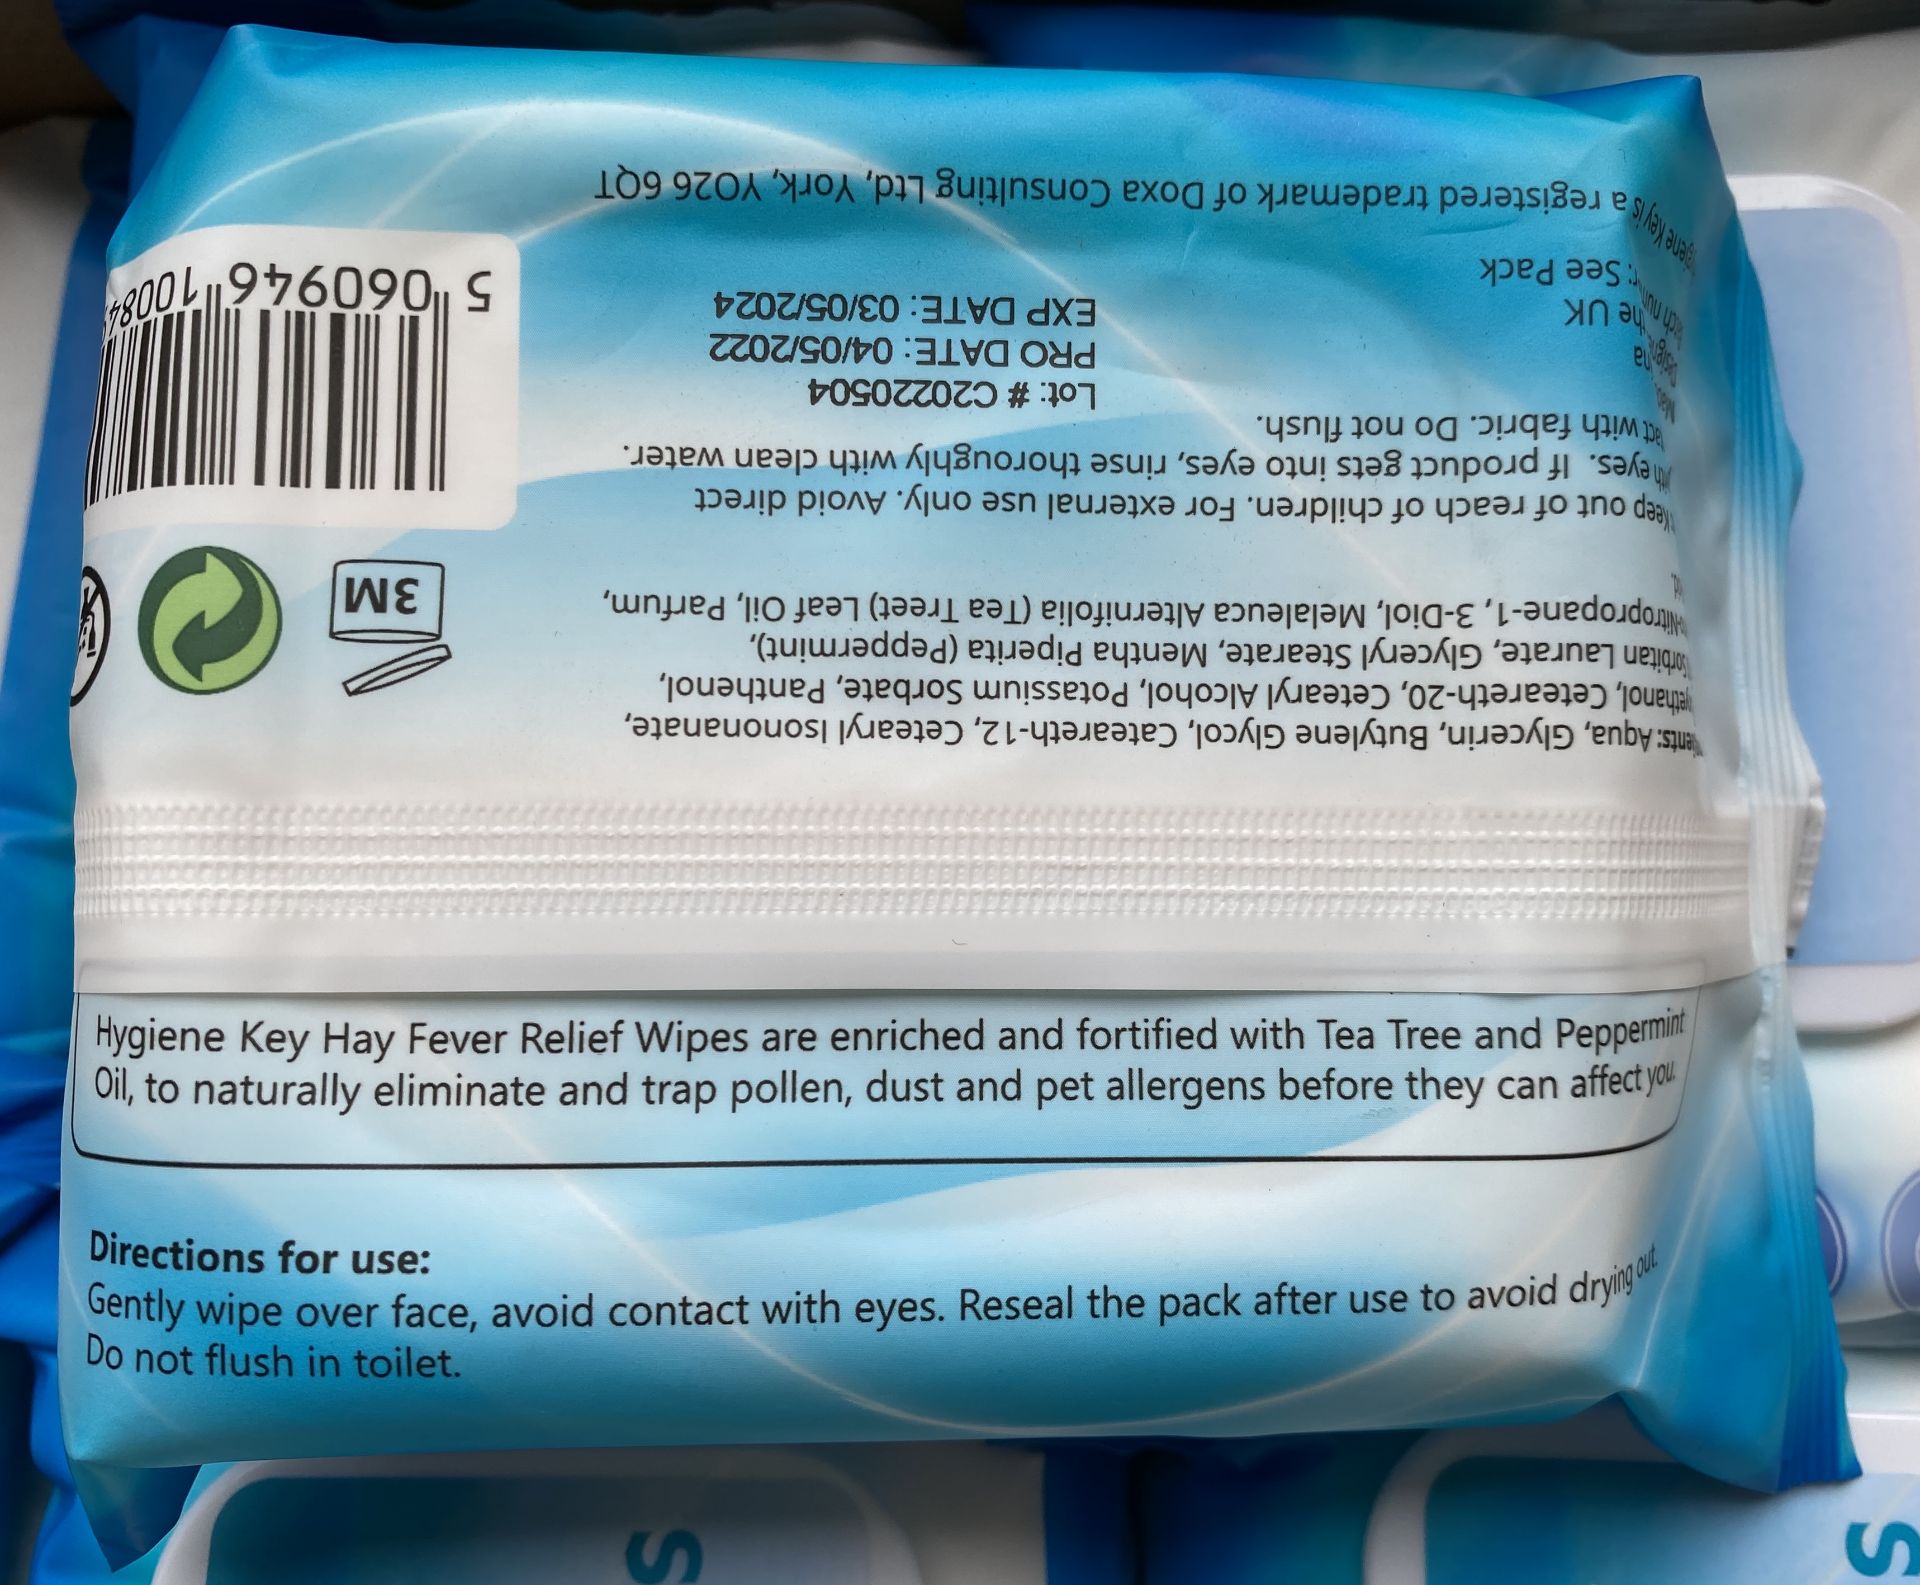 3600 x packs of Hygiene Key Hay Fever Relief Wipes (30 x wipes per pack - expiry date: 30/05/24) - - Bild 6 aus 8